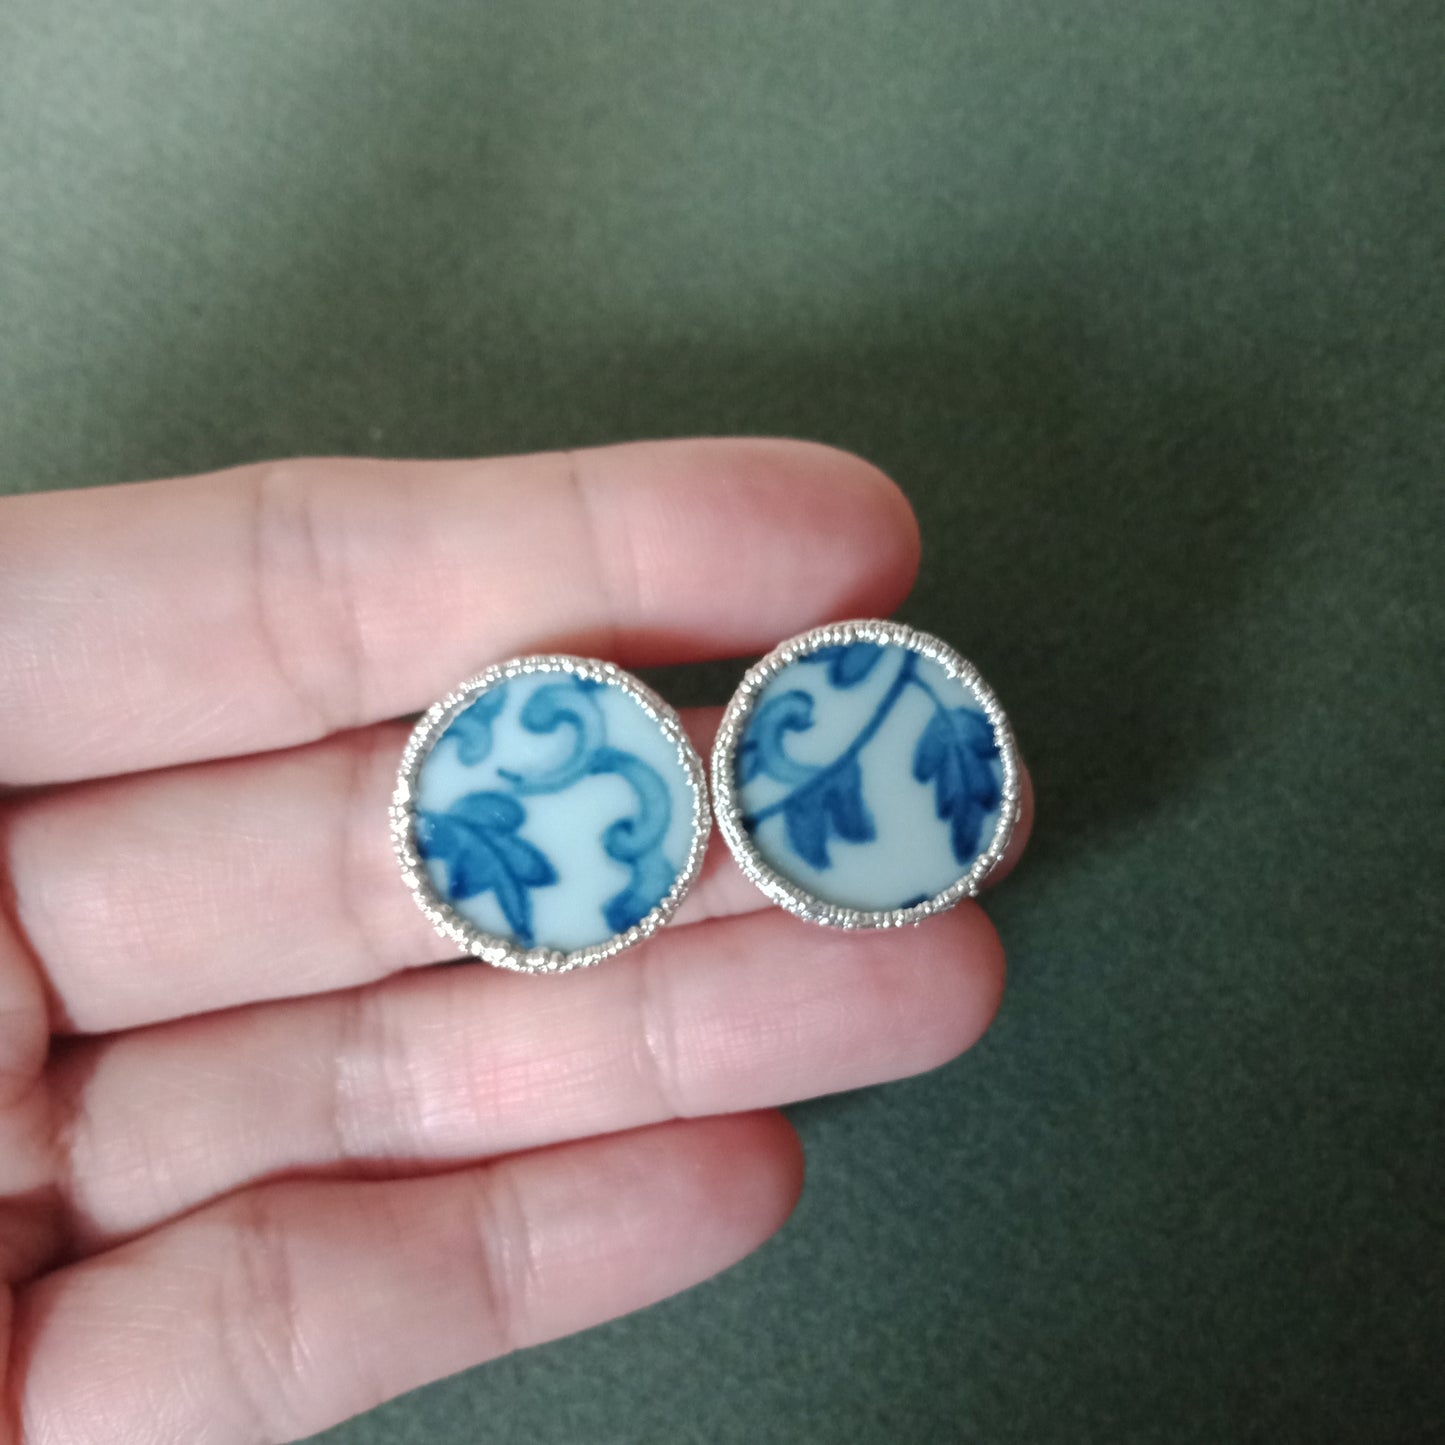 Blue and white porcelain silver tone stud earrings